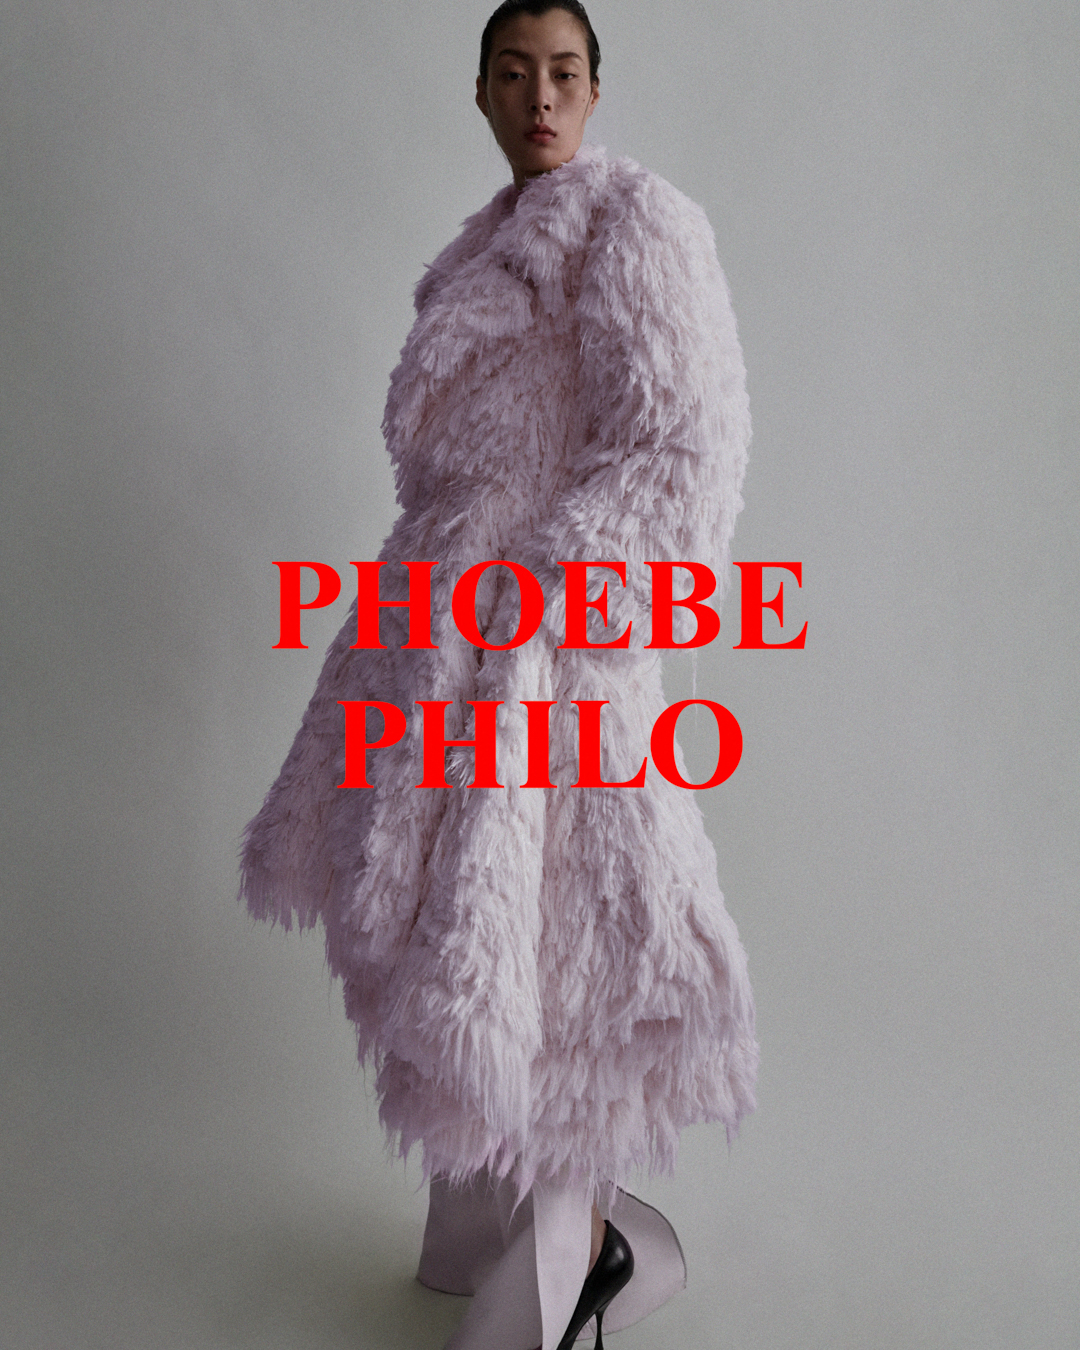 Phoebe Philo's Fashion Brand Has Finally Launched — Here's What To Know